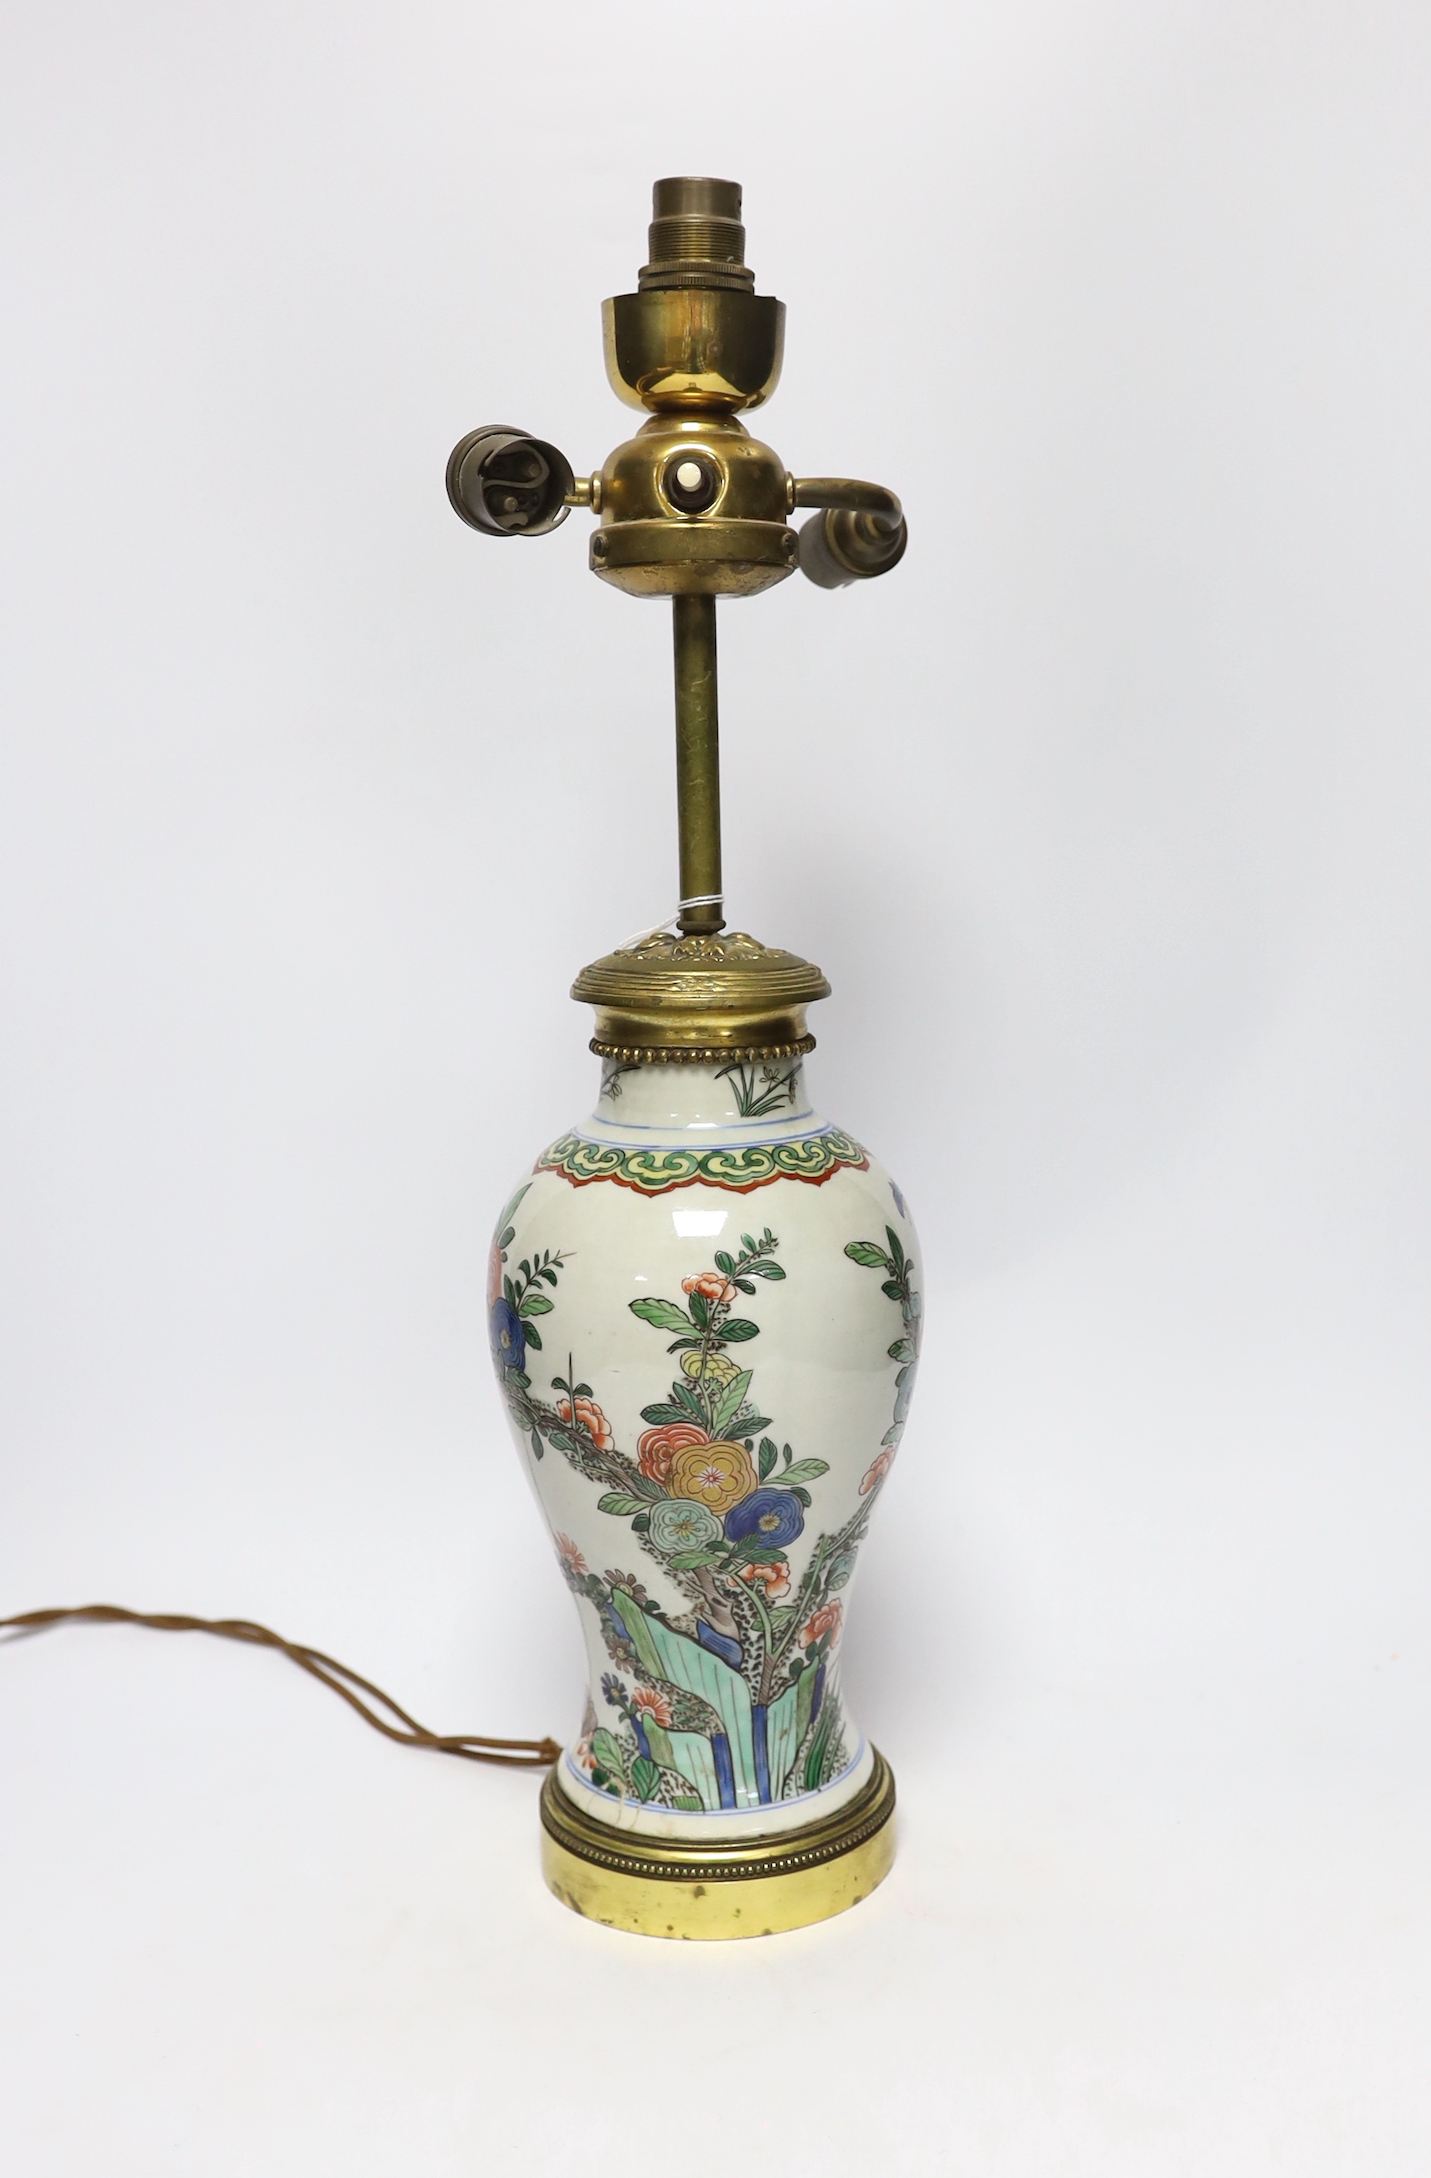 A Samson Chinese style famille verte and ormolu mounted lamp, 48cm high including light fitting